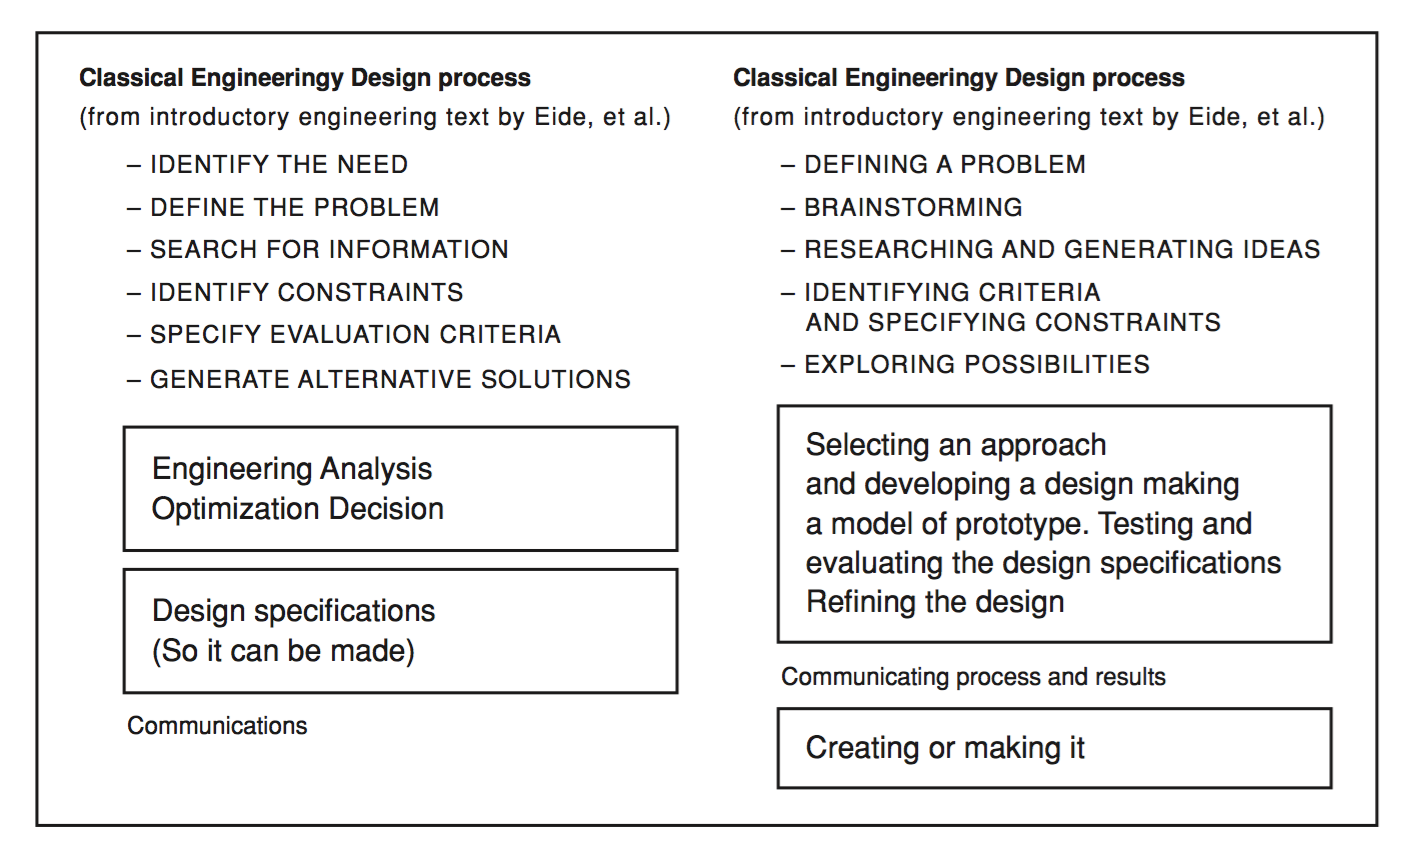 Comparison of engineering and technology education design processes